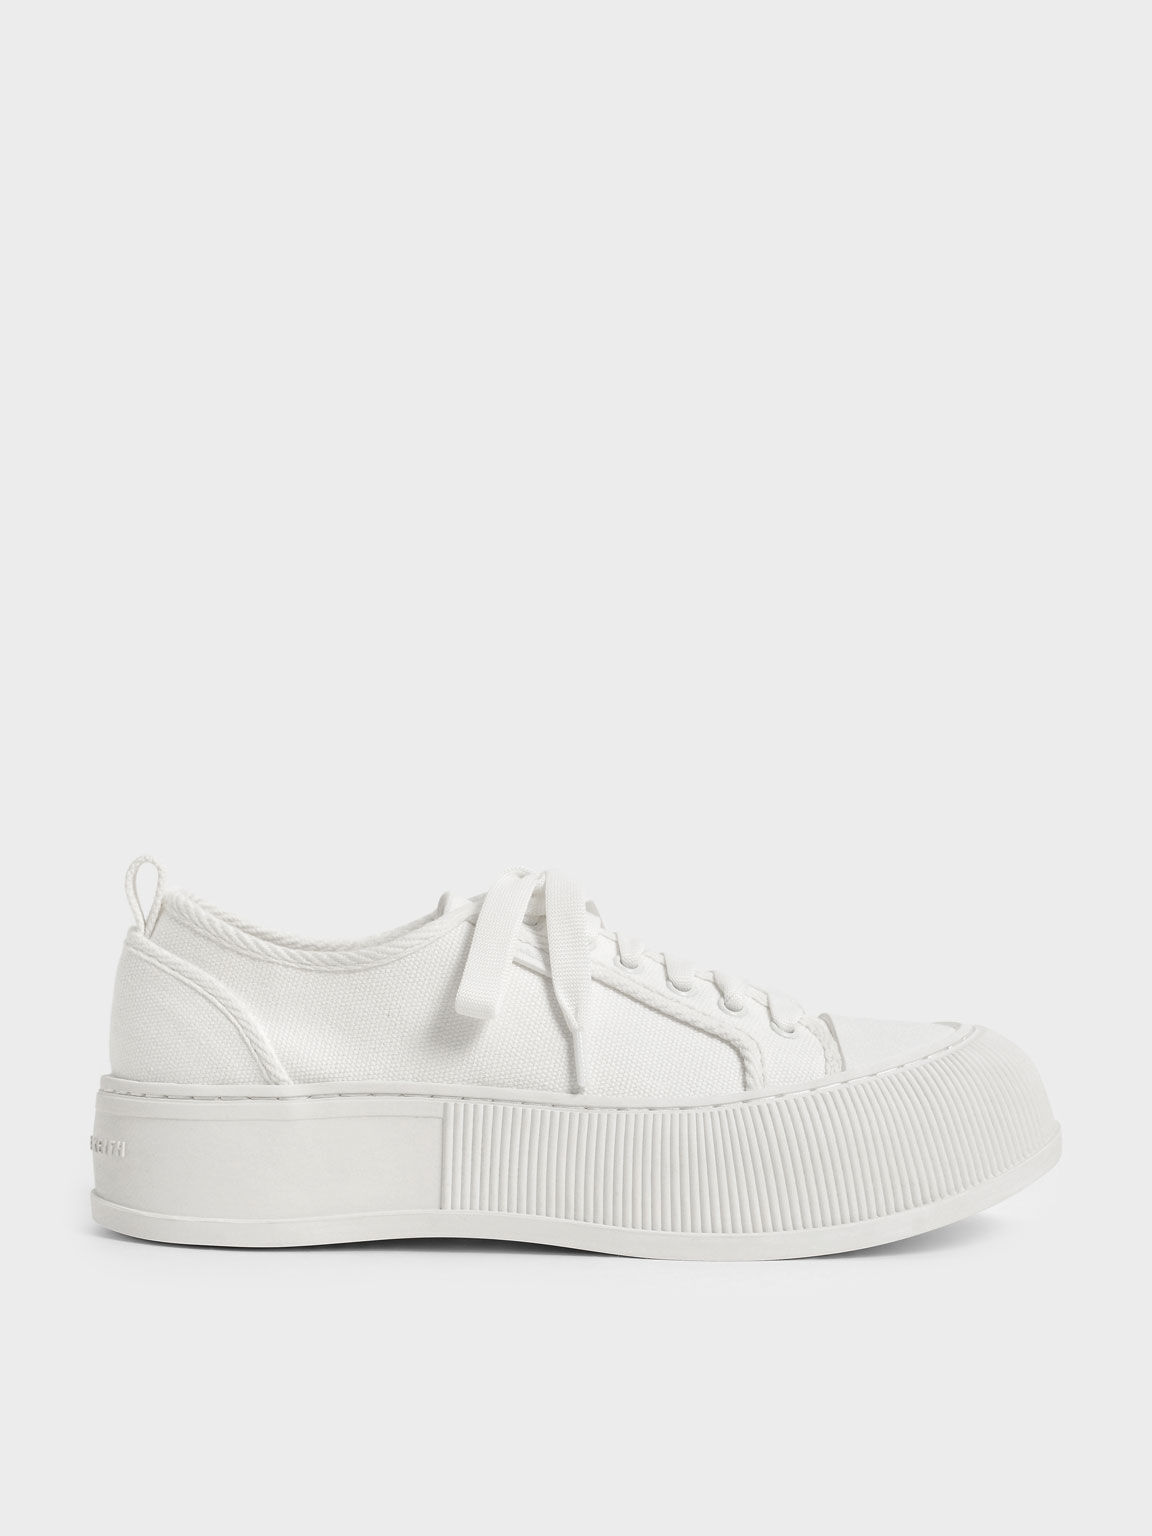 Organic Cotton Low-Top Sneakers, White, hi-res